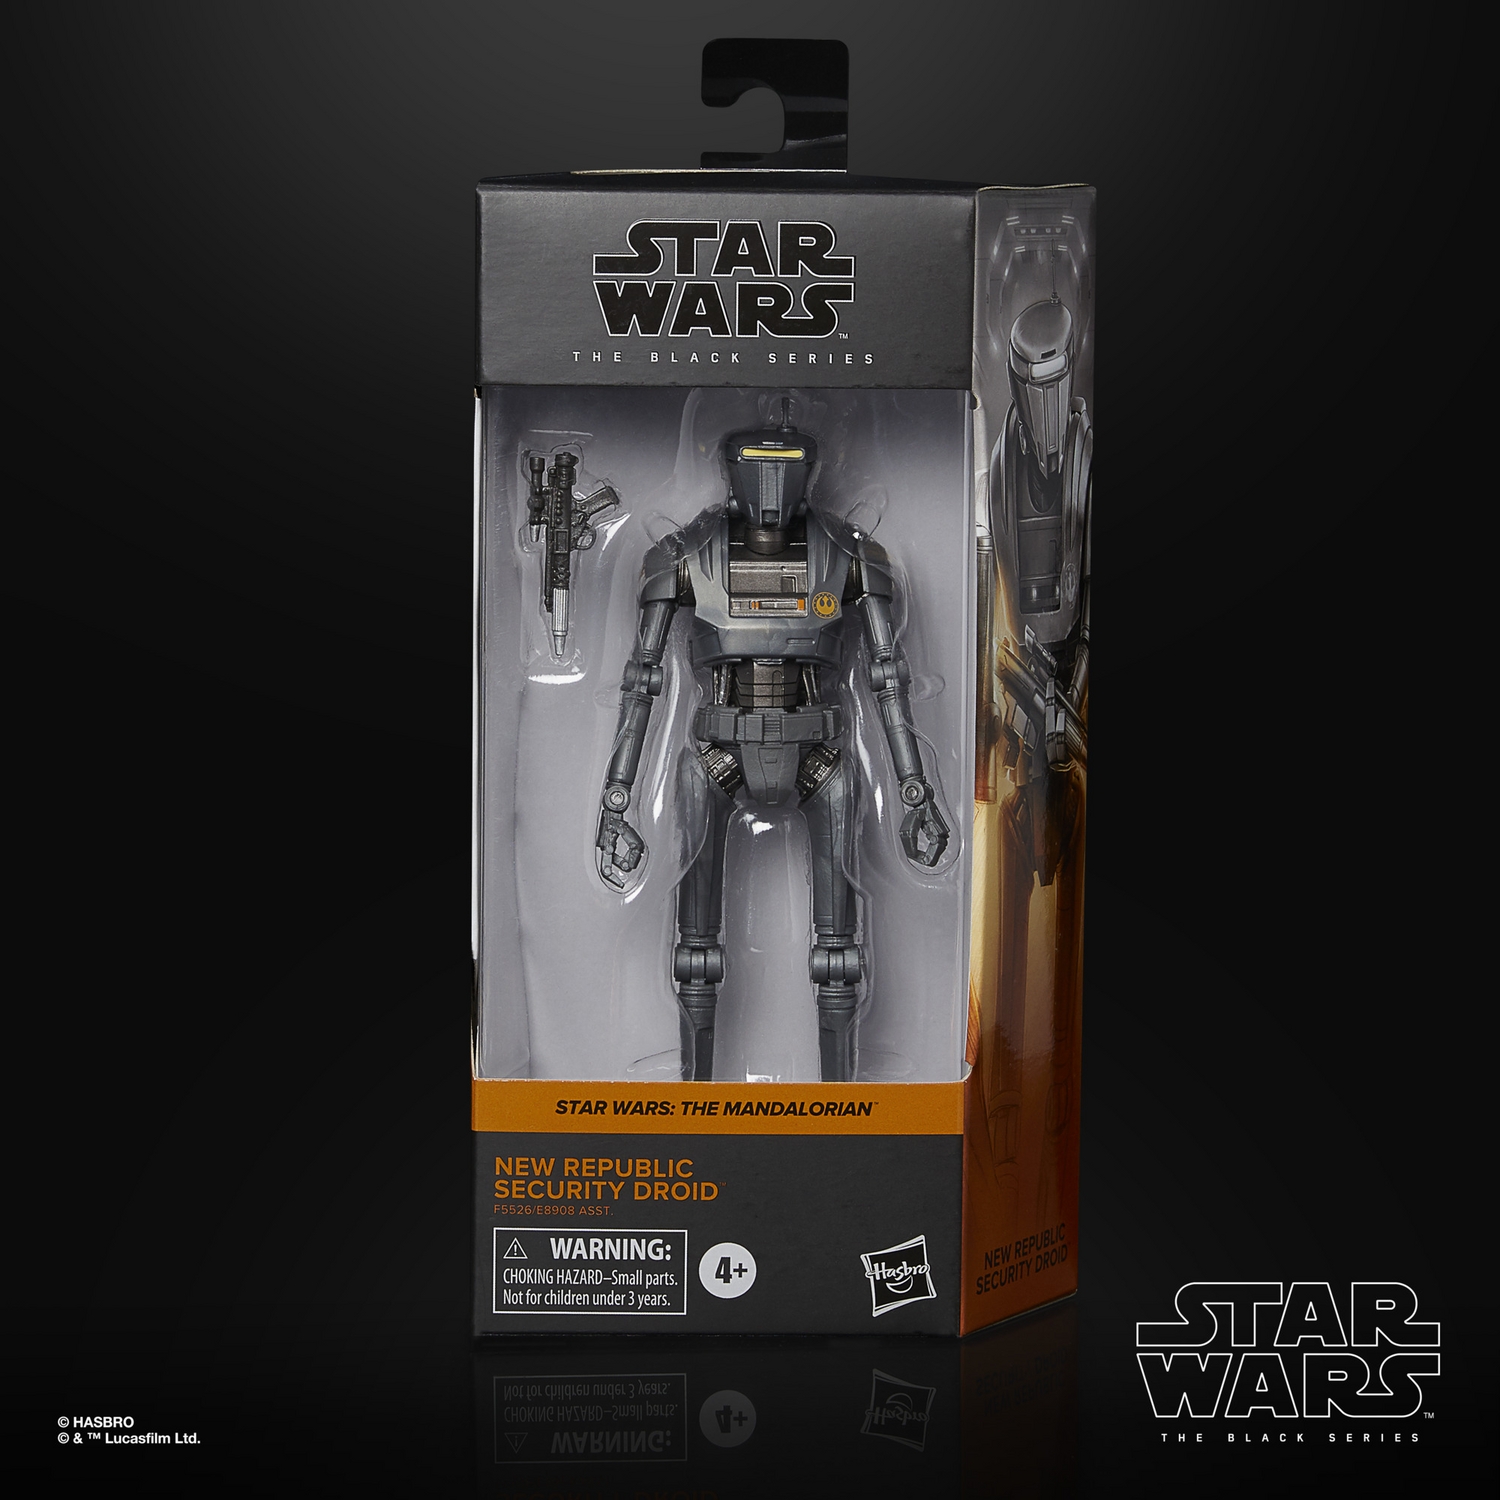 STAR WARS THE BLACK SERIES 6-INCH NEW REPUBLIC SECURITY DROID FIGURE - 1.jpg